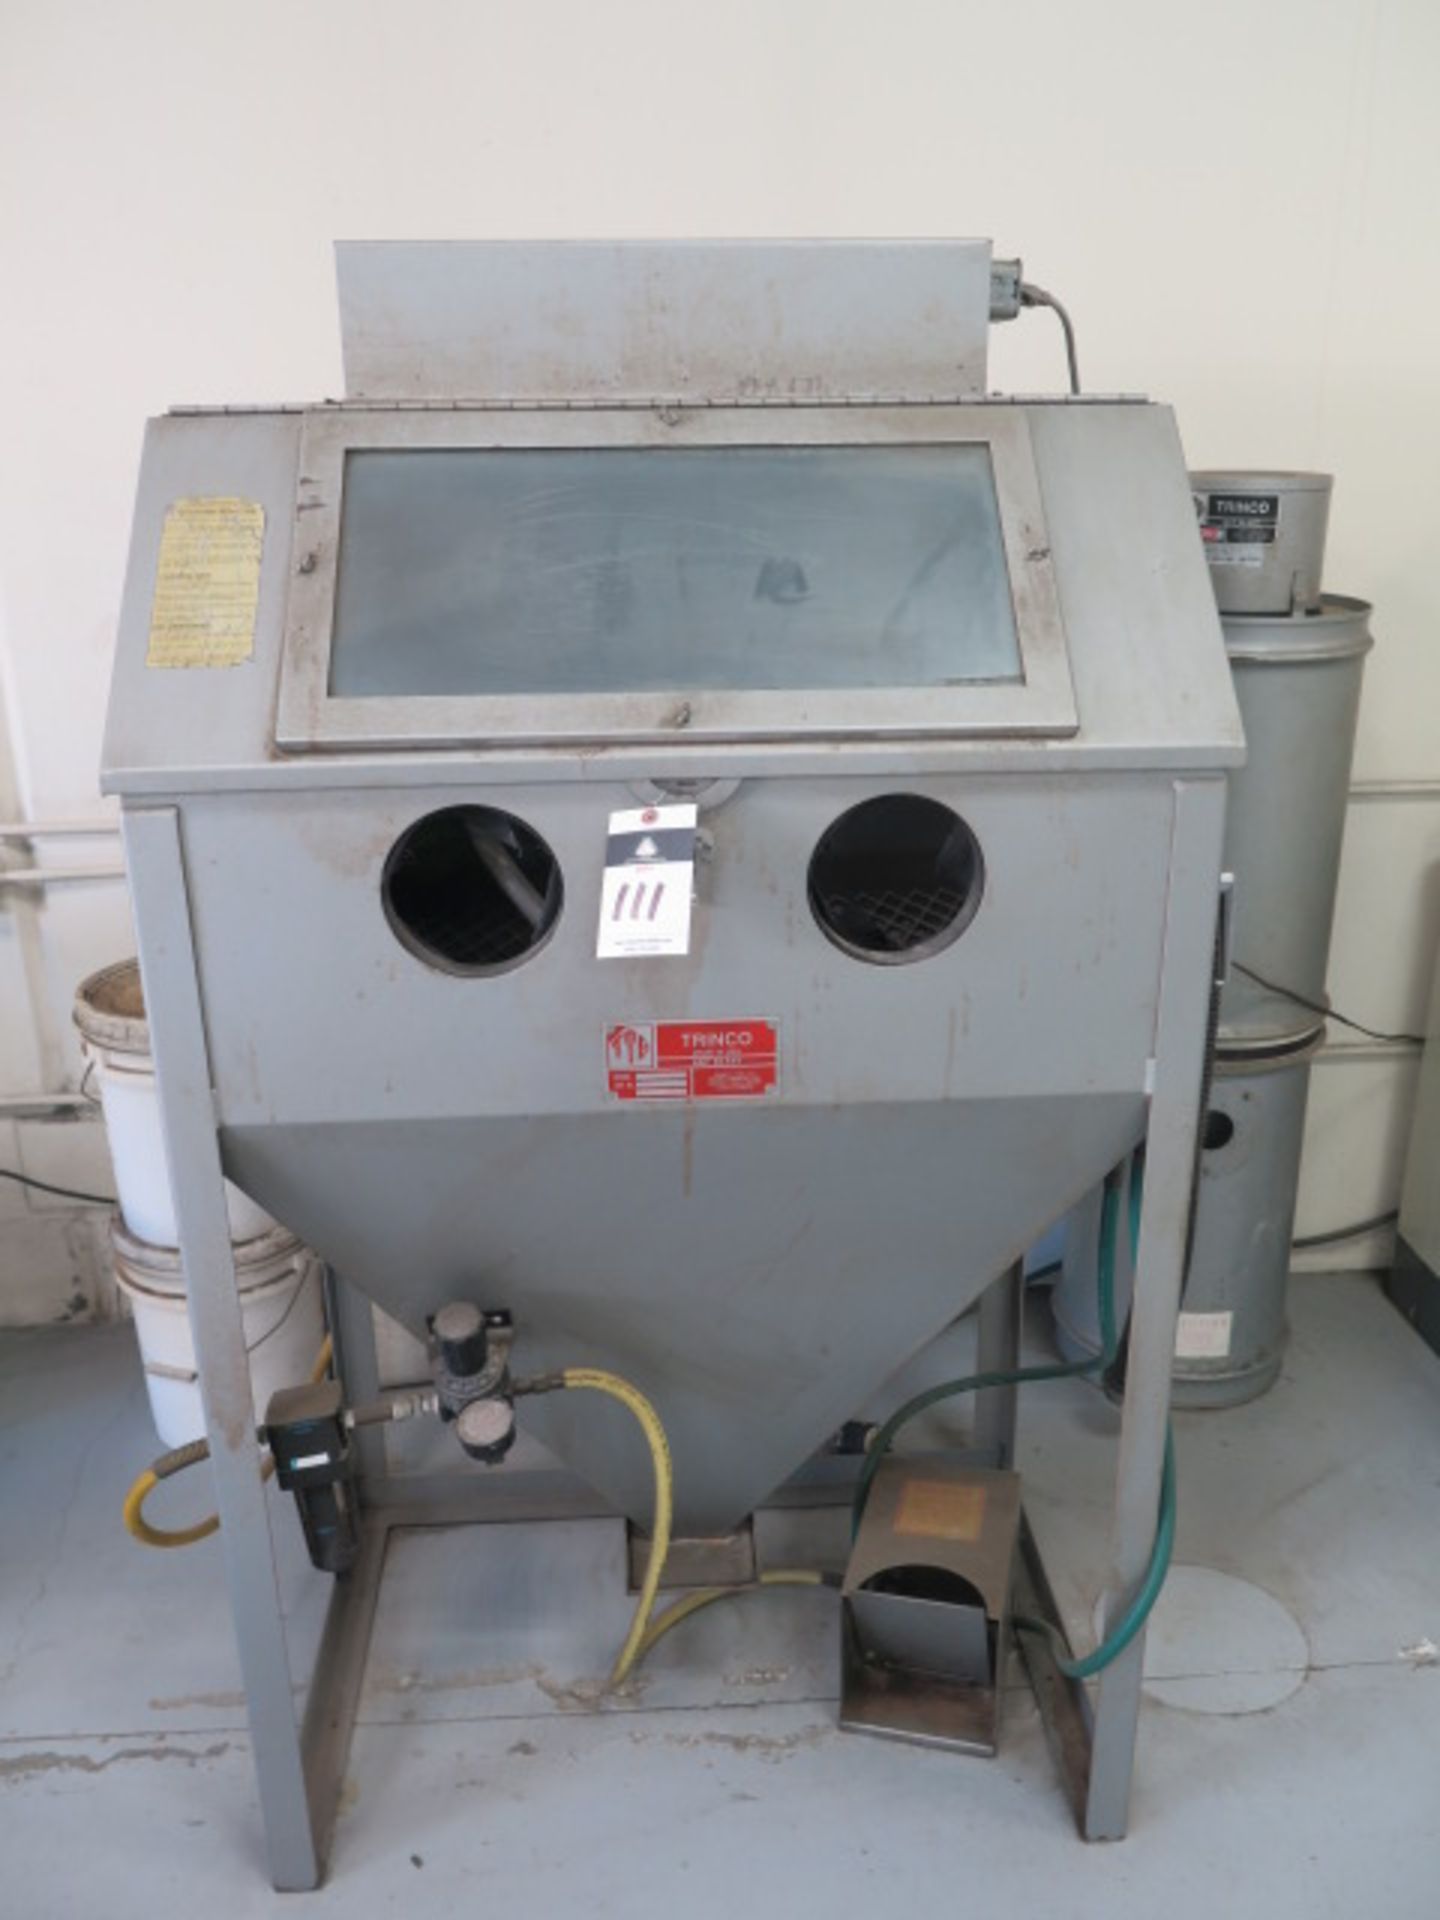 Trinco mdl. 36/BP Dry Blast Cabinet s/n 44830-6 w/ Dust Collector - Image 2 of 6